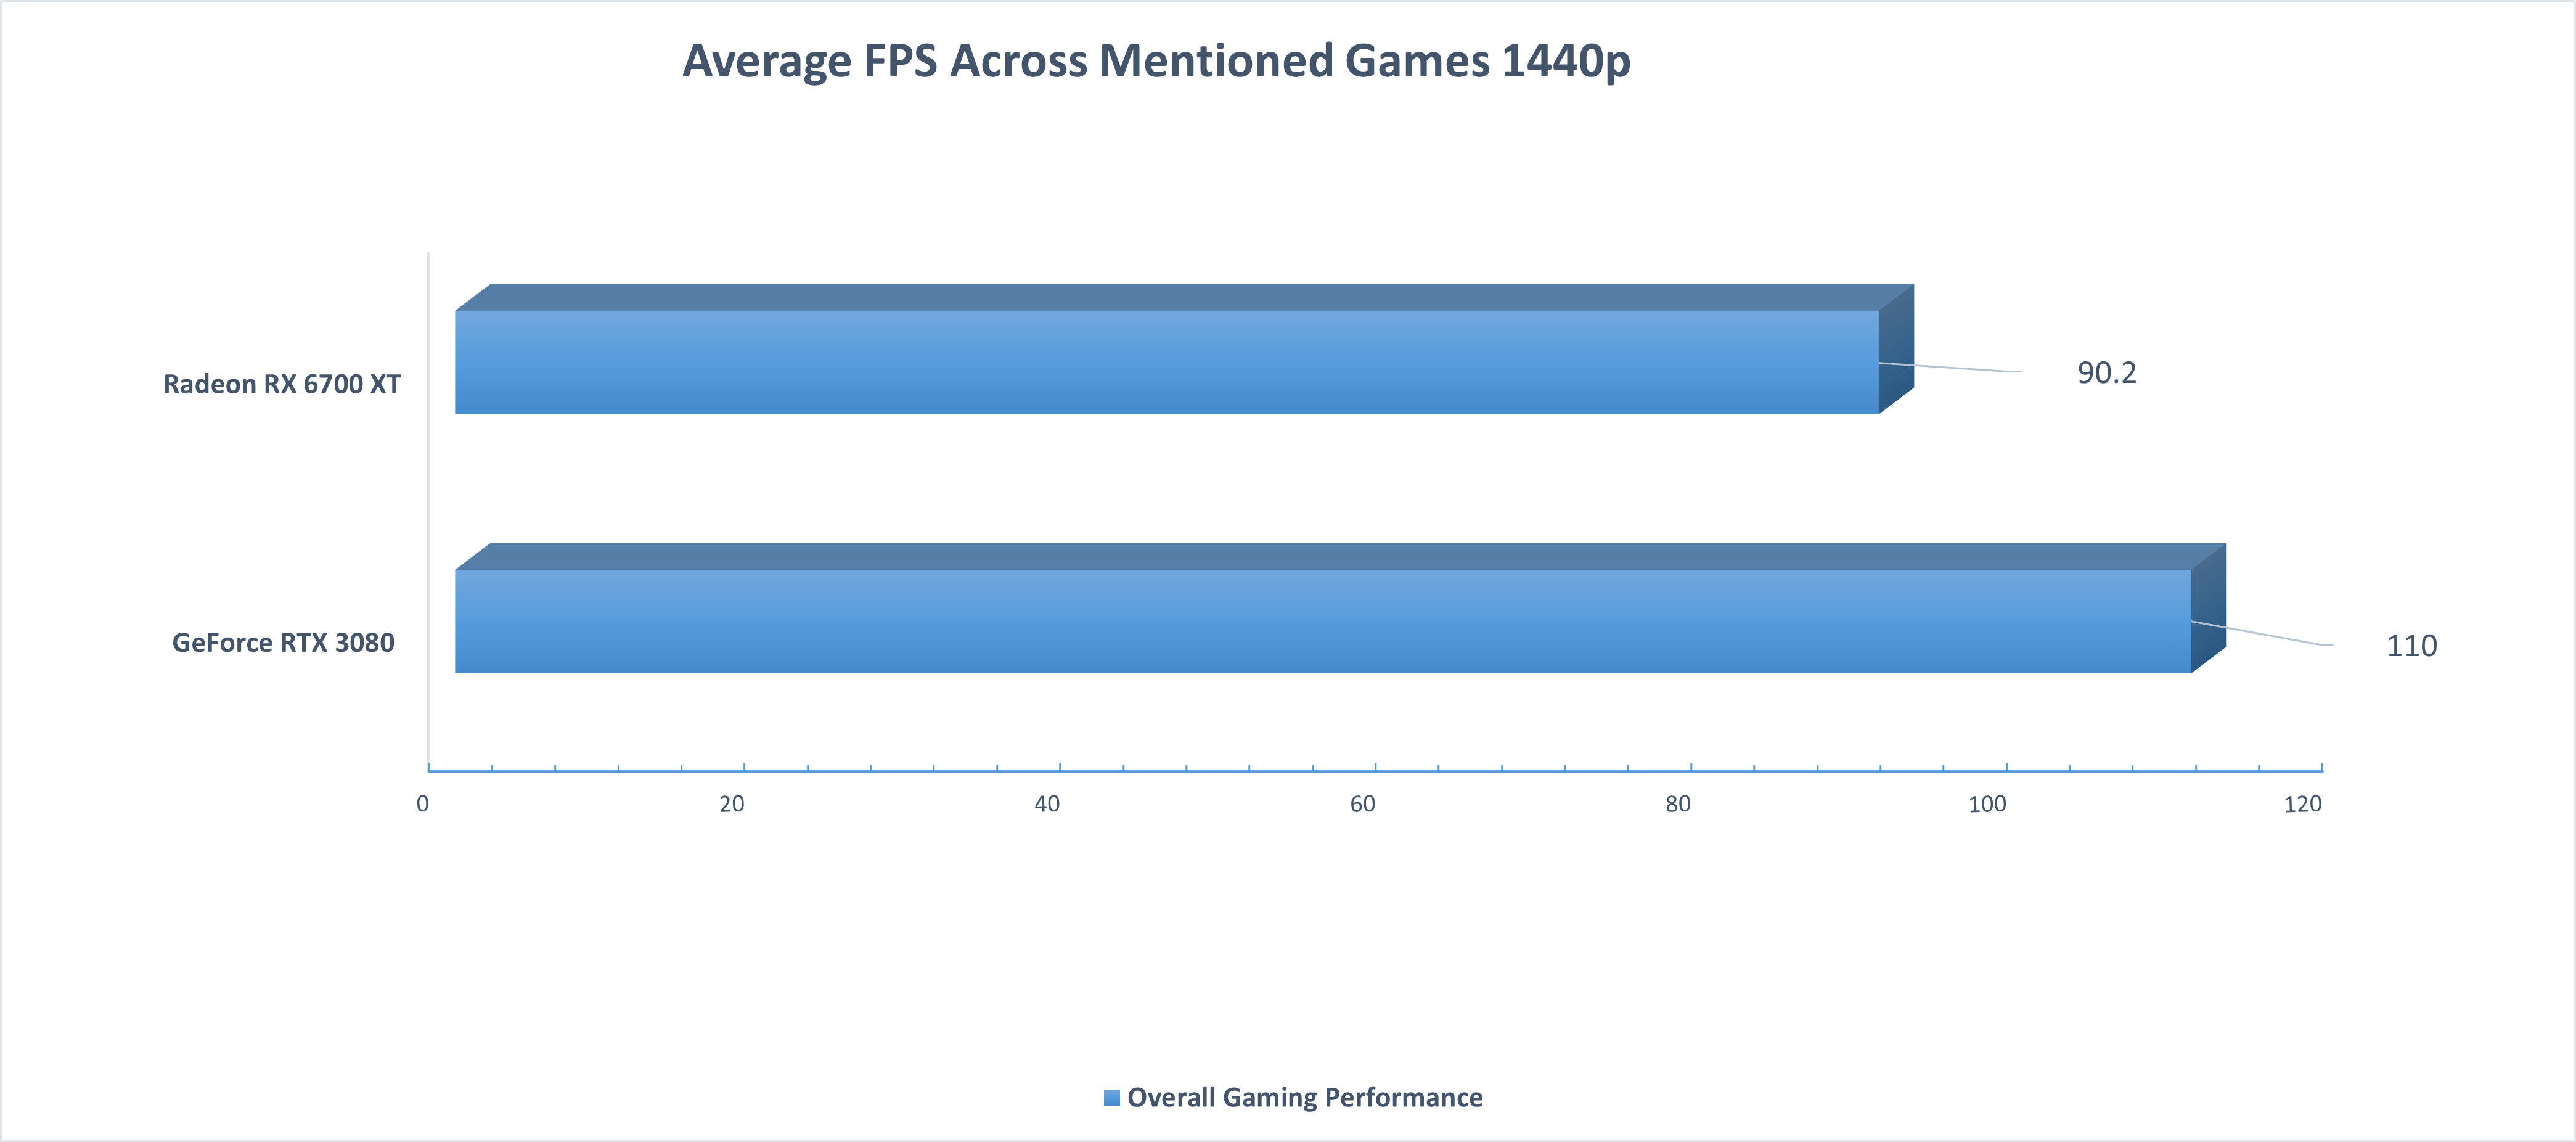 Average FPS Performance Across Mentioned Games